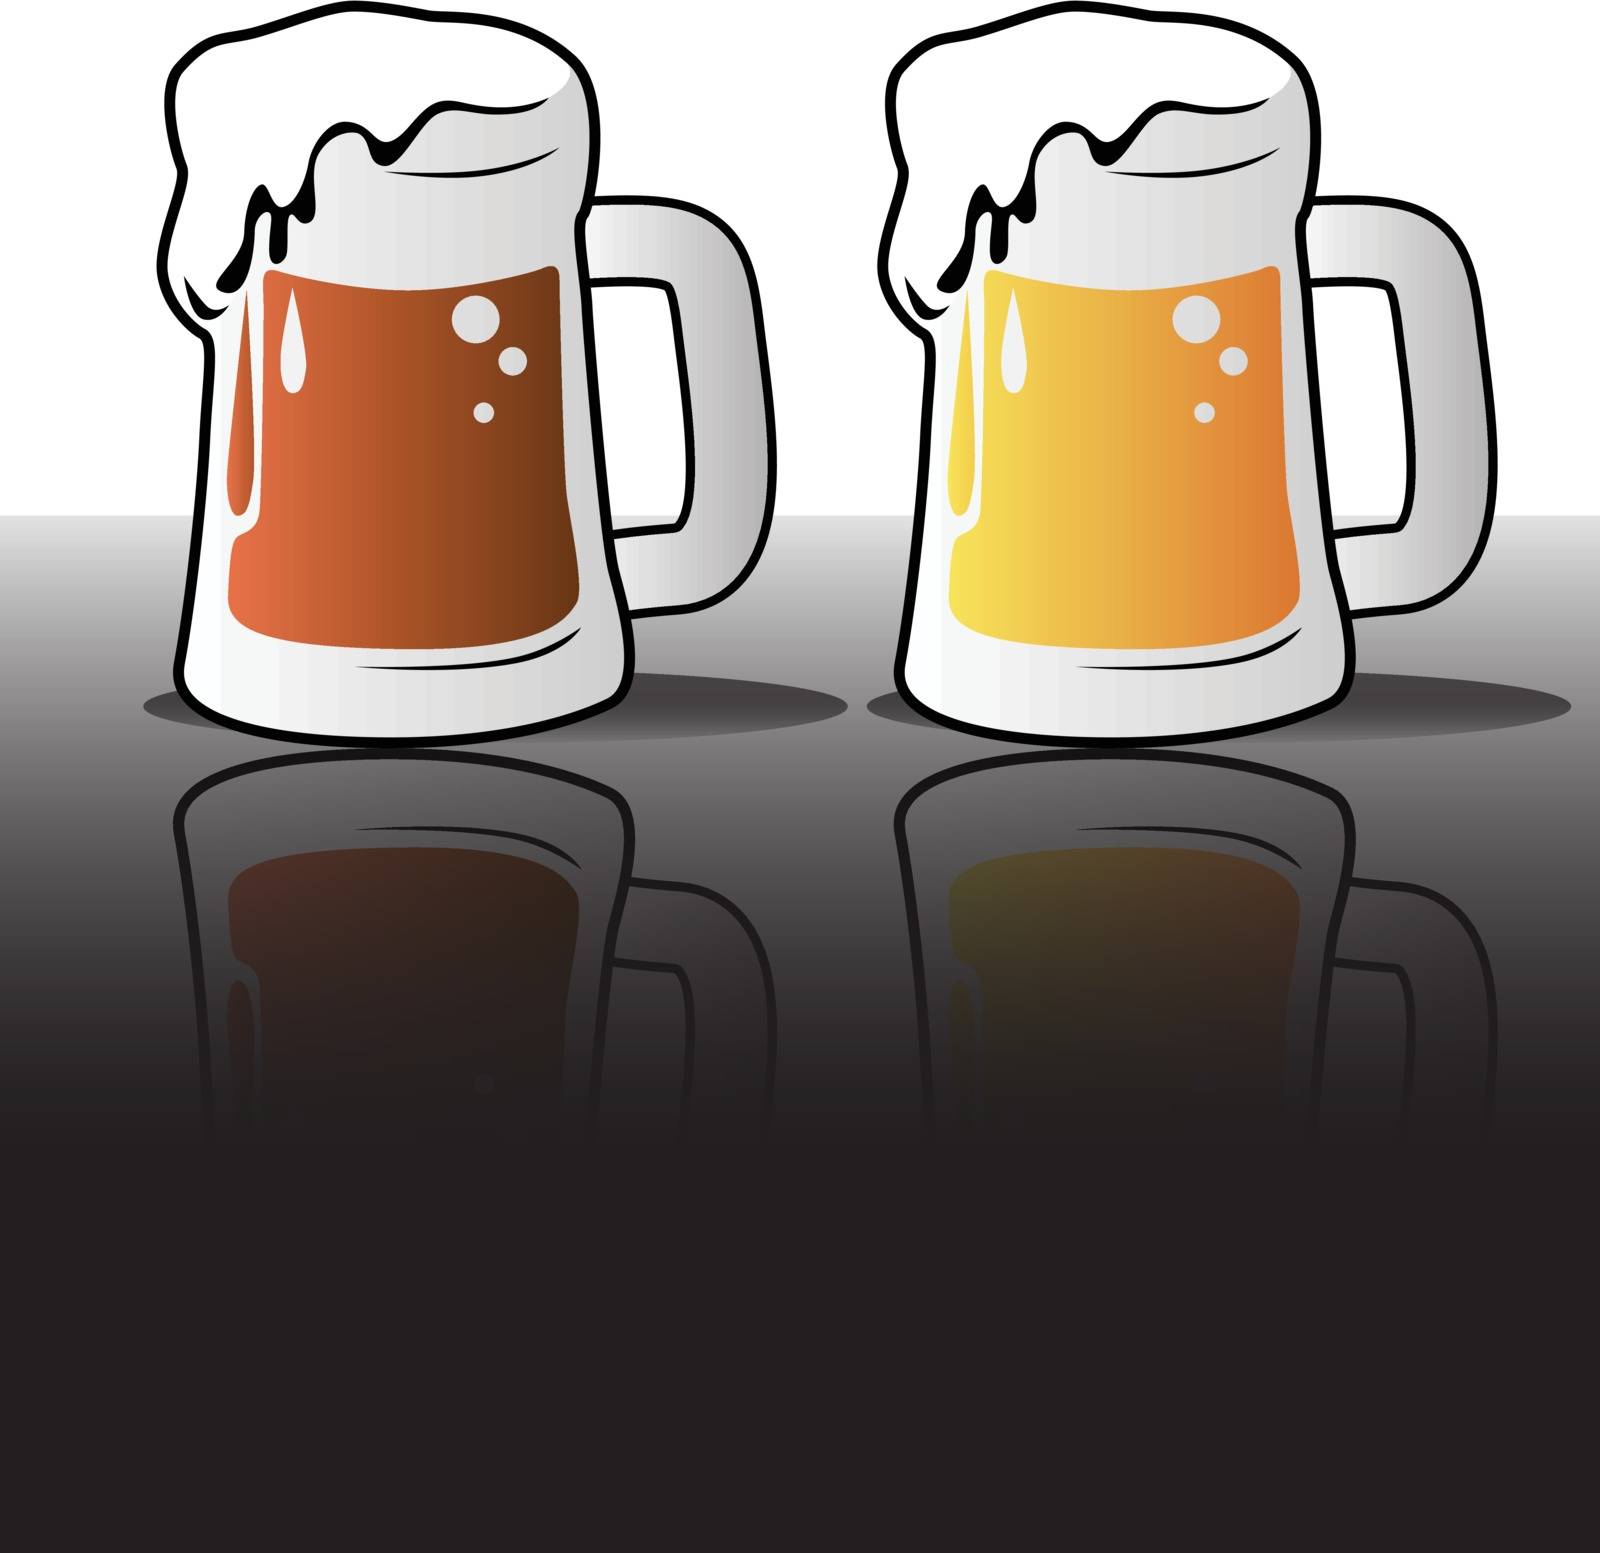 Illustration of two kinds of Beer